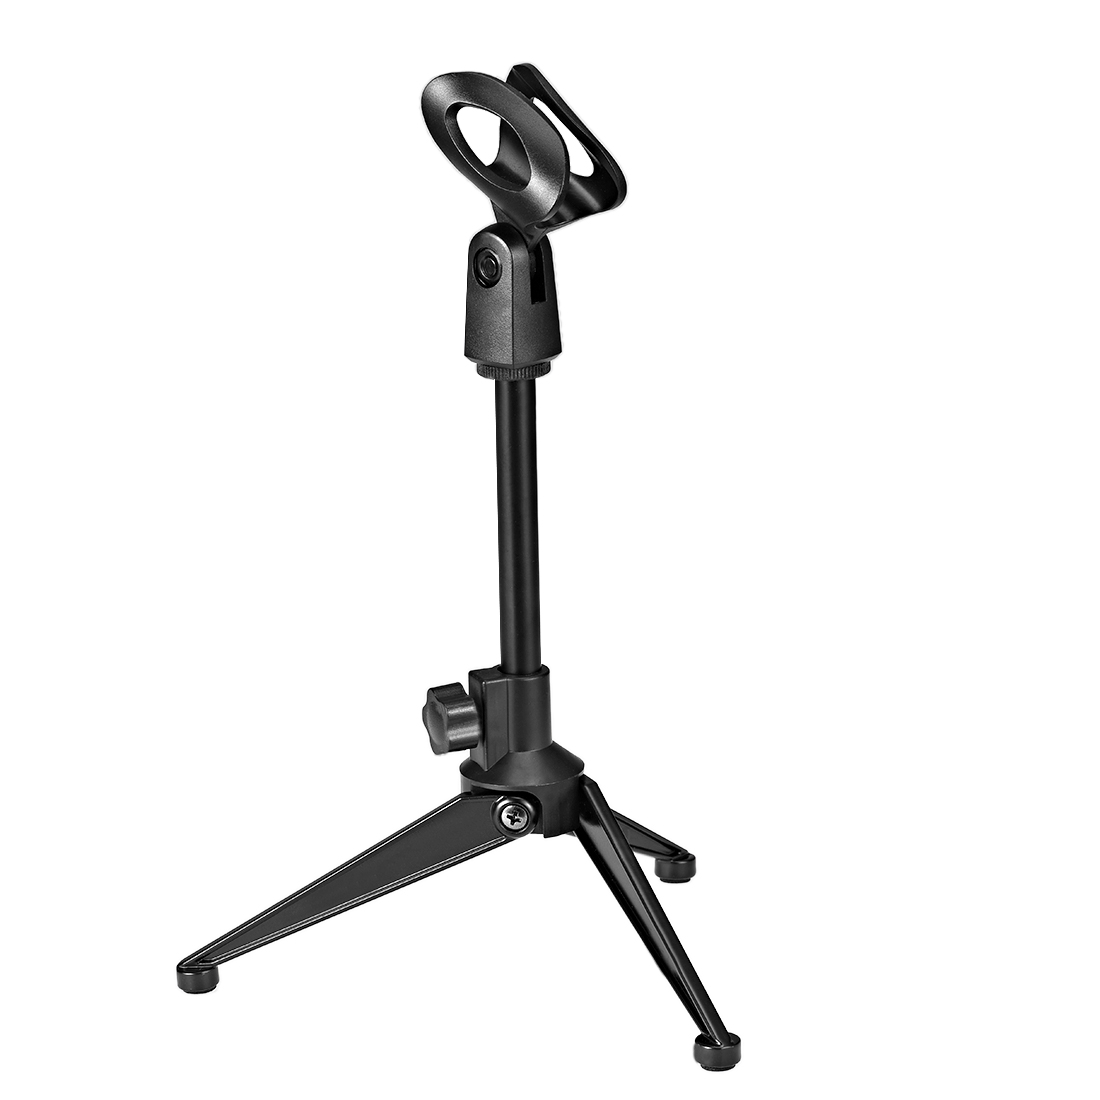 Unique Bargains Adjustable Desktop Microphone Stand Tripod Tabletop Stand Foldable with Mic Clip